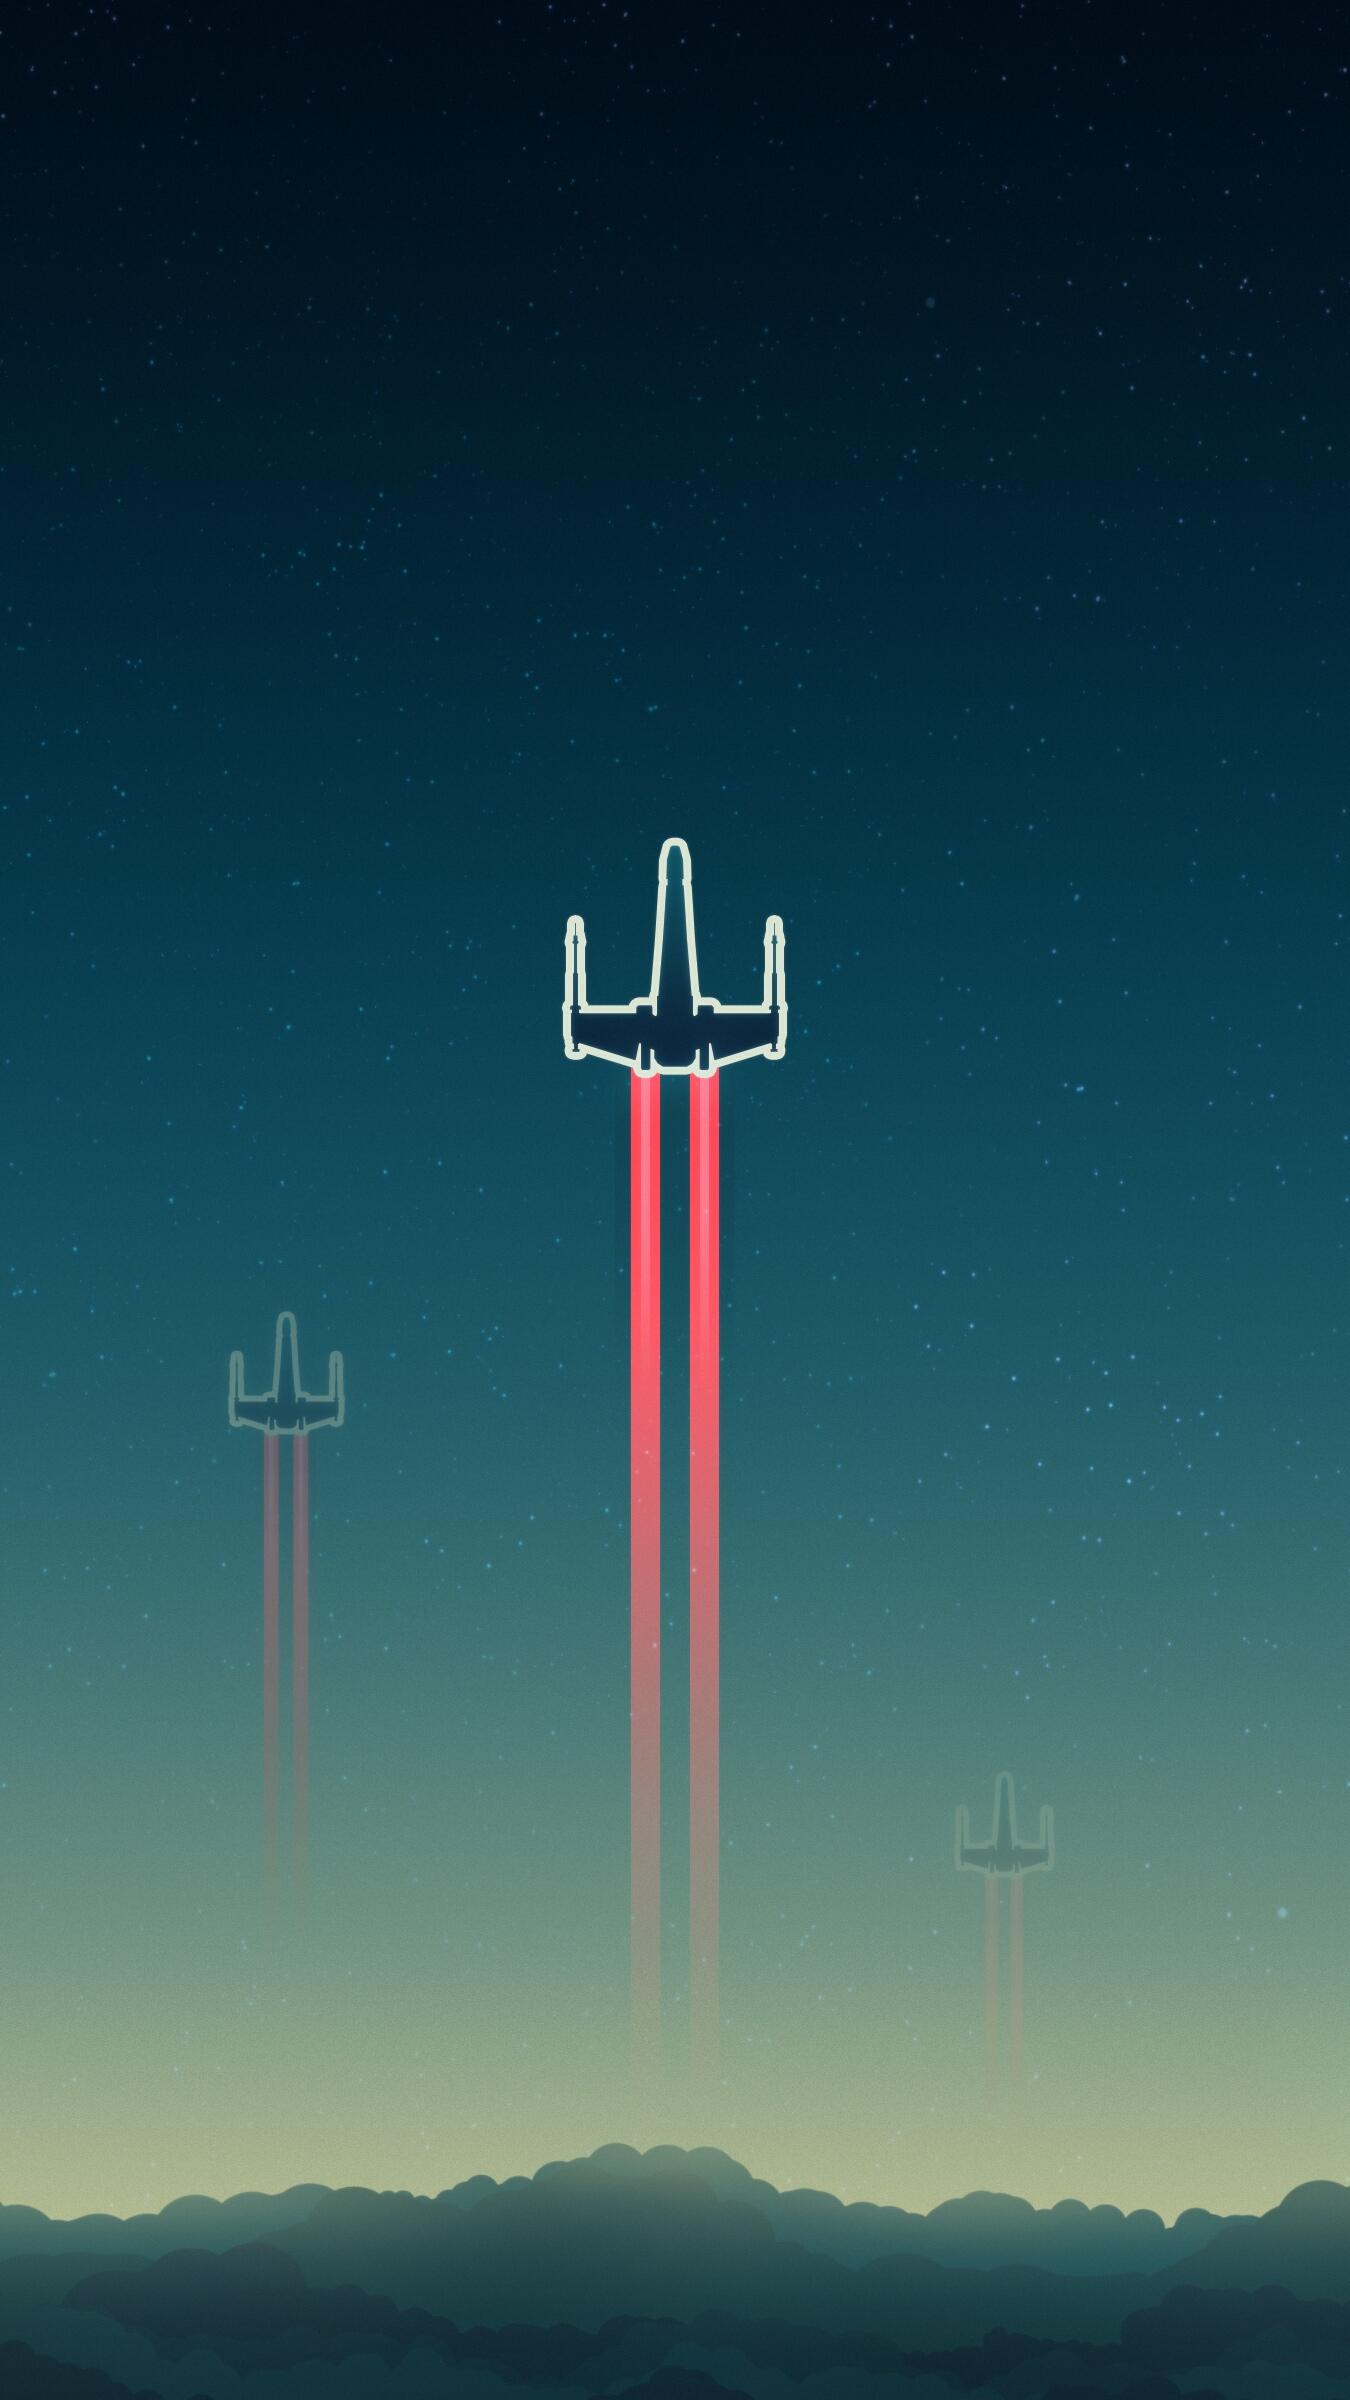 NMS / Star Wars crossover mobile wallpaper